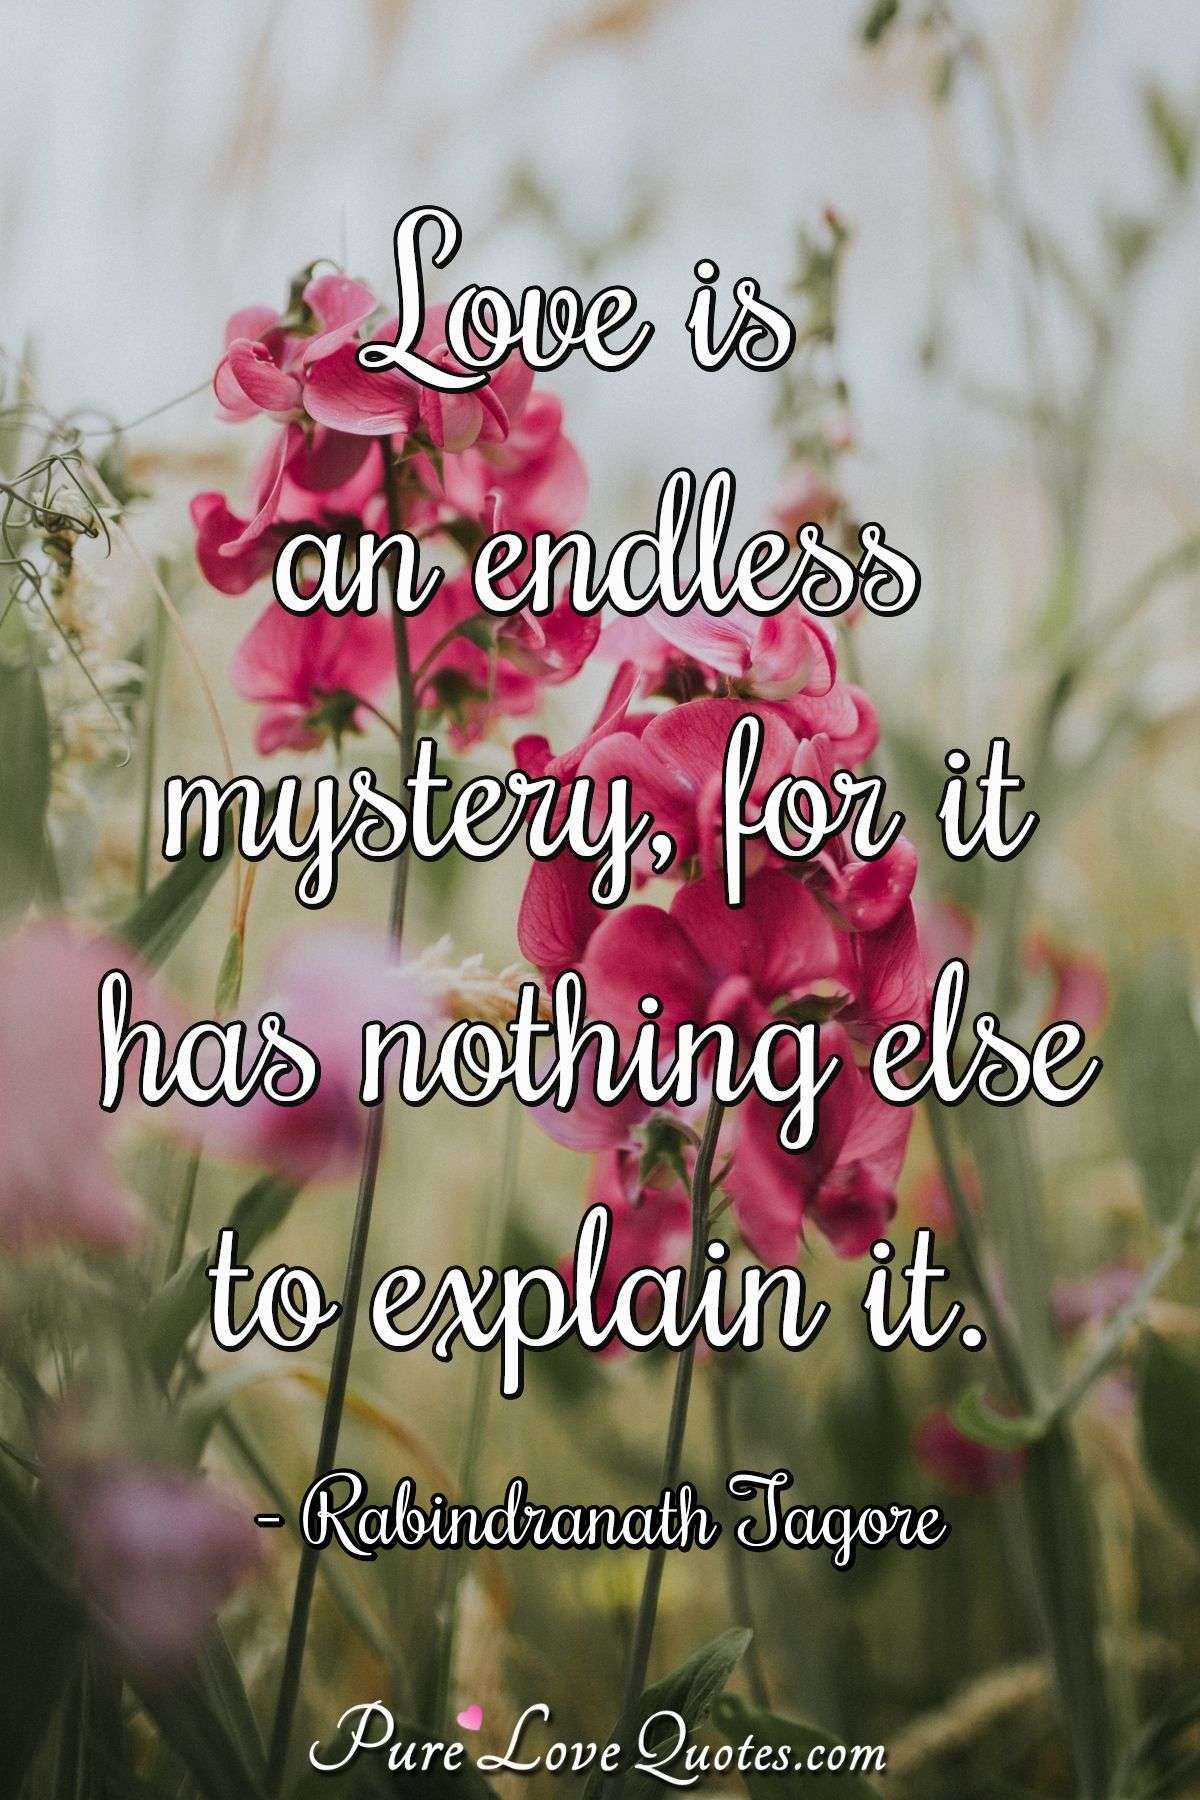 Love is an endless mystery, for it has nothing else to explain it. - Rabindranath Tagore